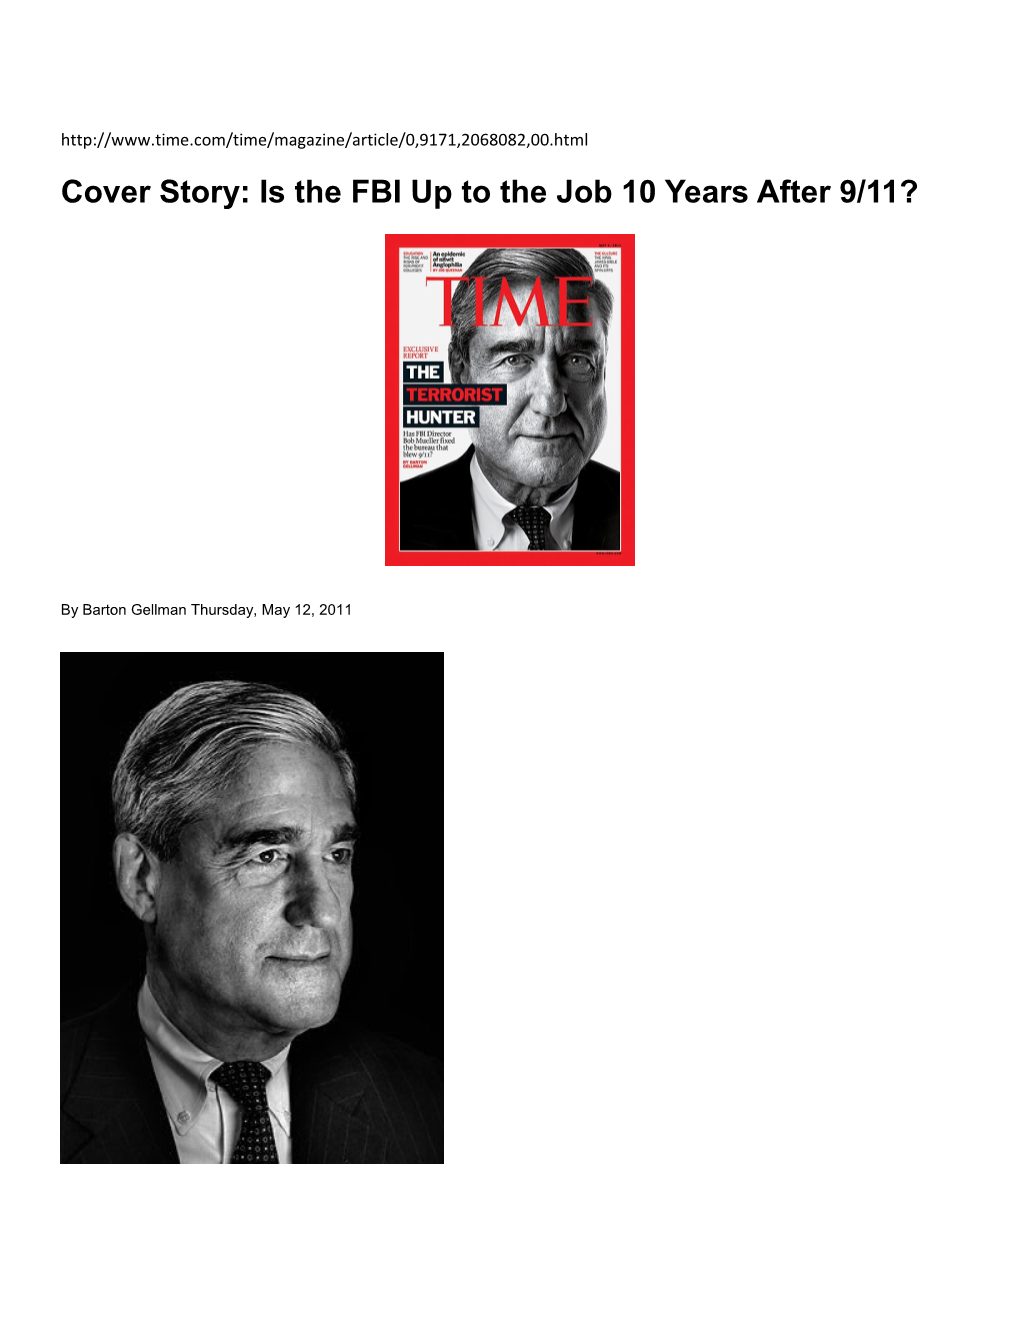 Cover Story: Is the FBI up to the Job 10 Years After 9/11?